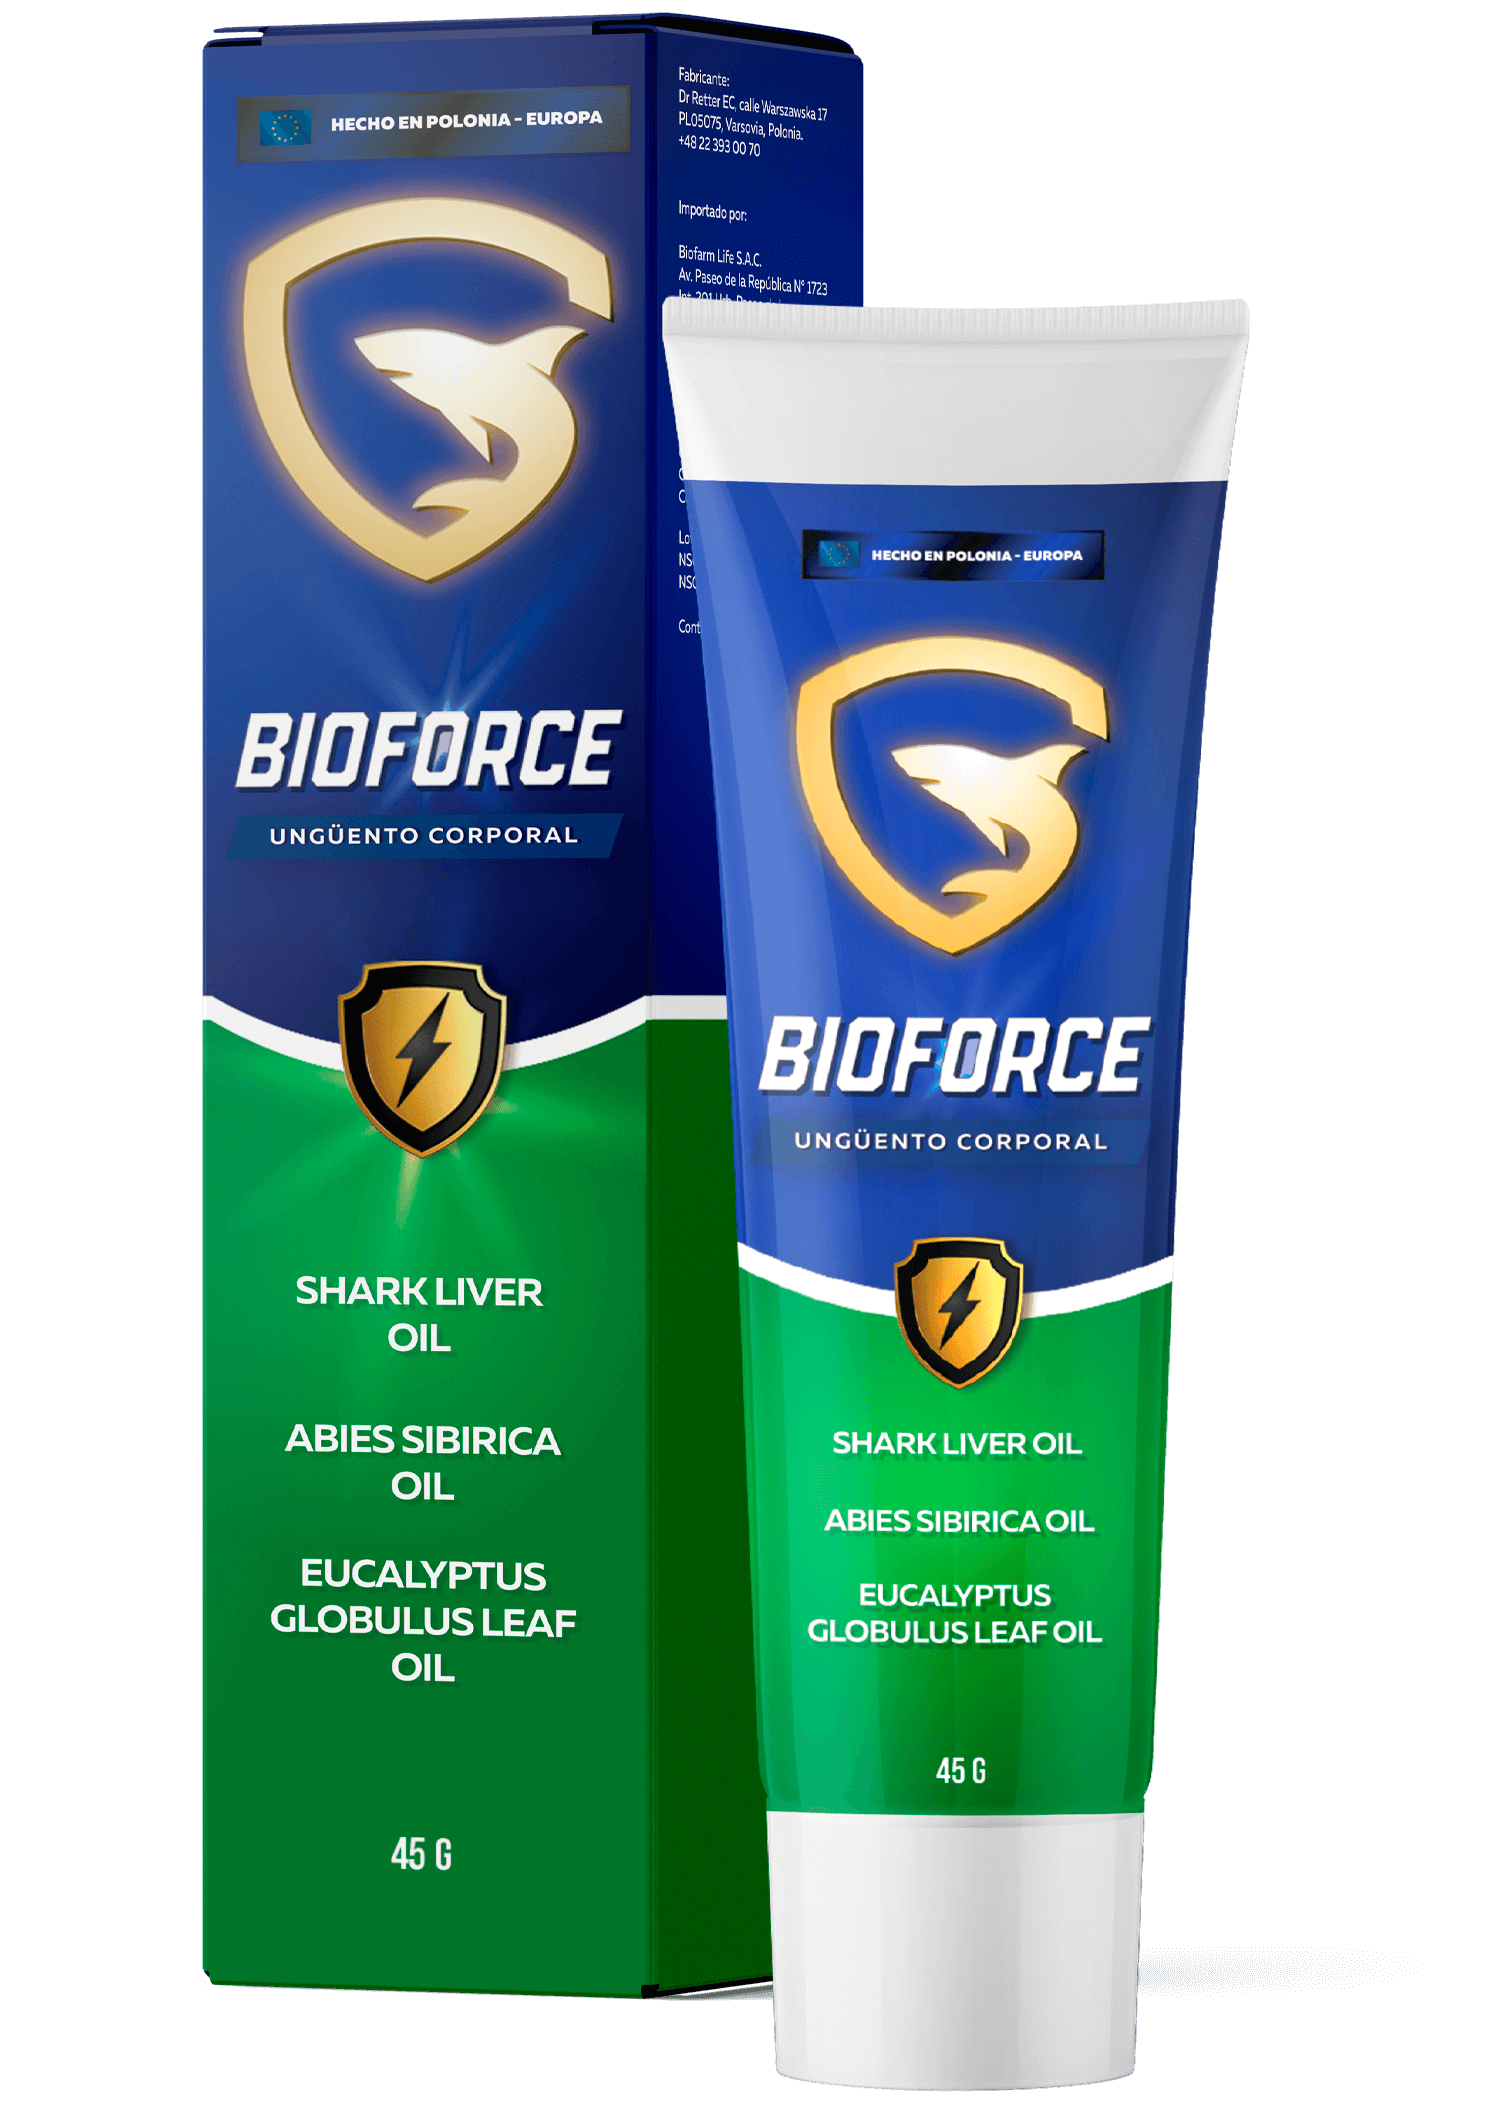 Bioforce - product review